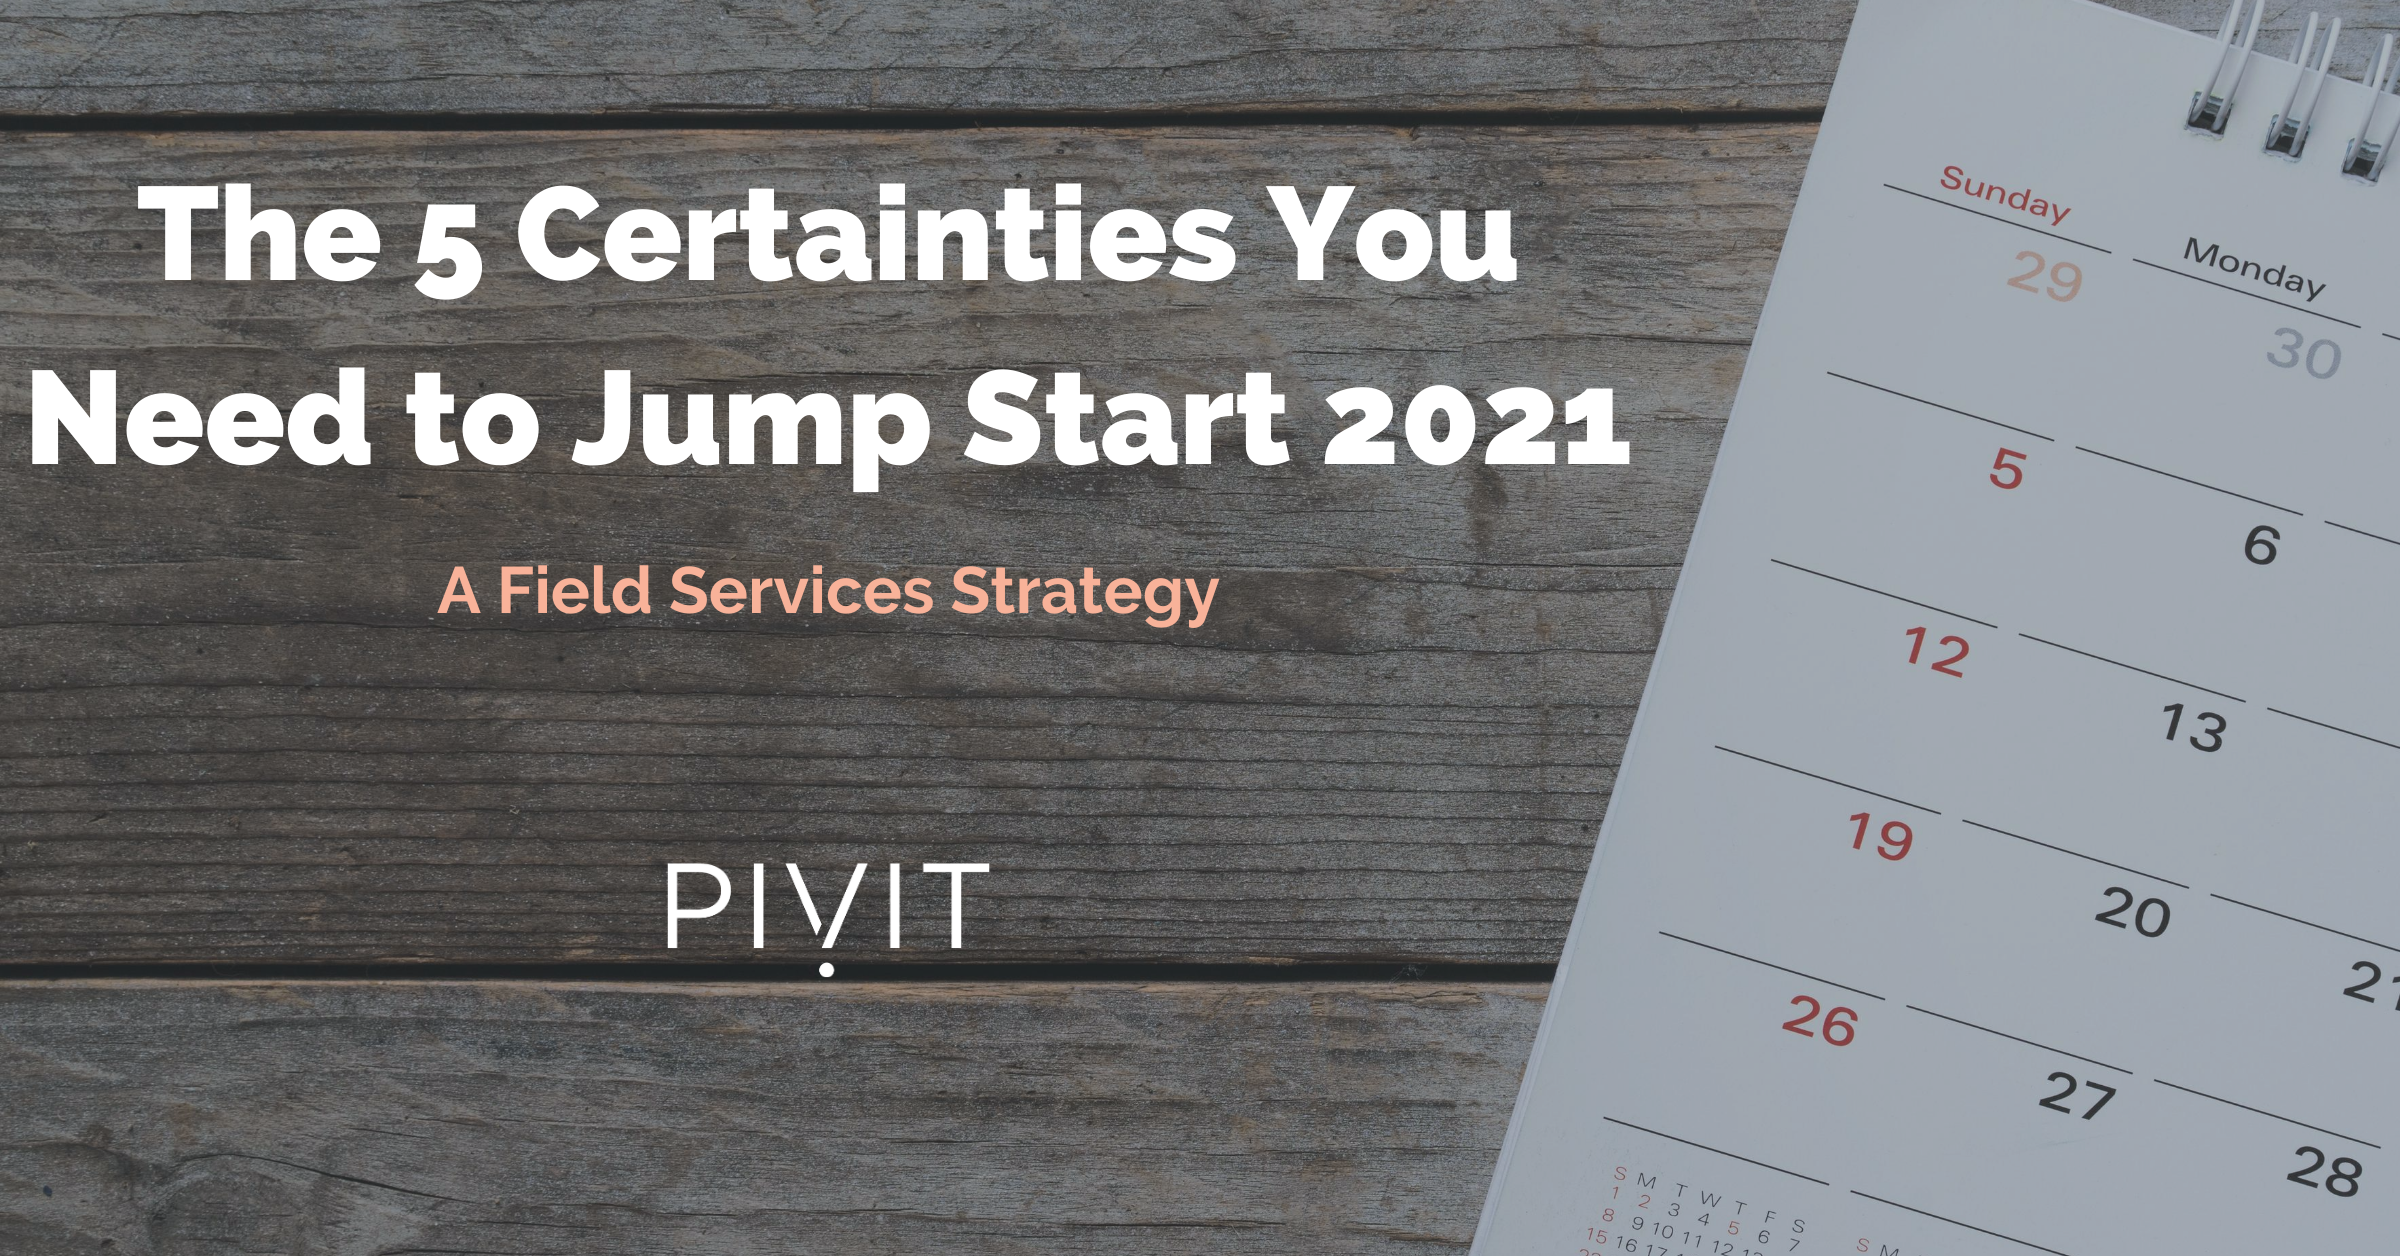 The 5 Certainties You Need to Jump Start 2021 (1)